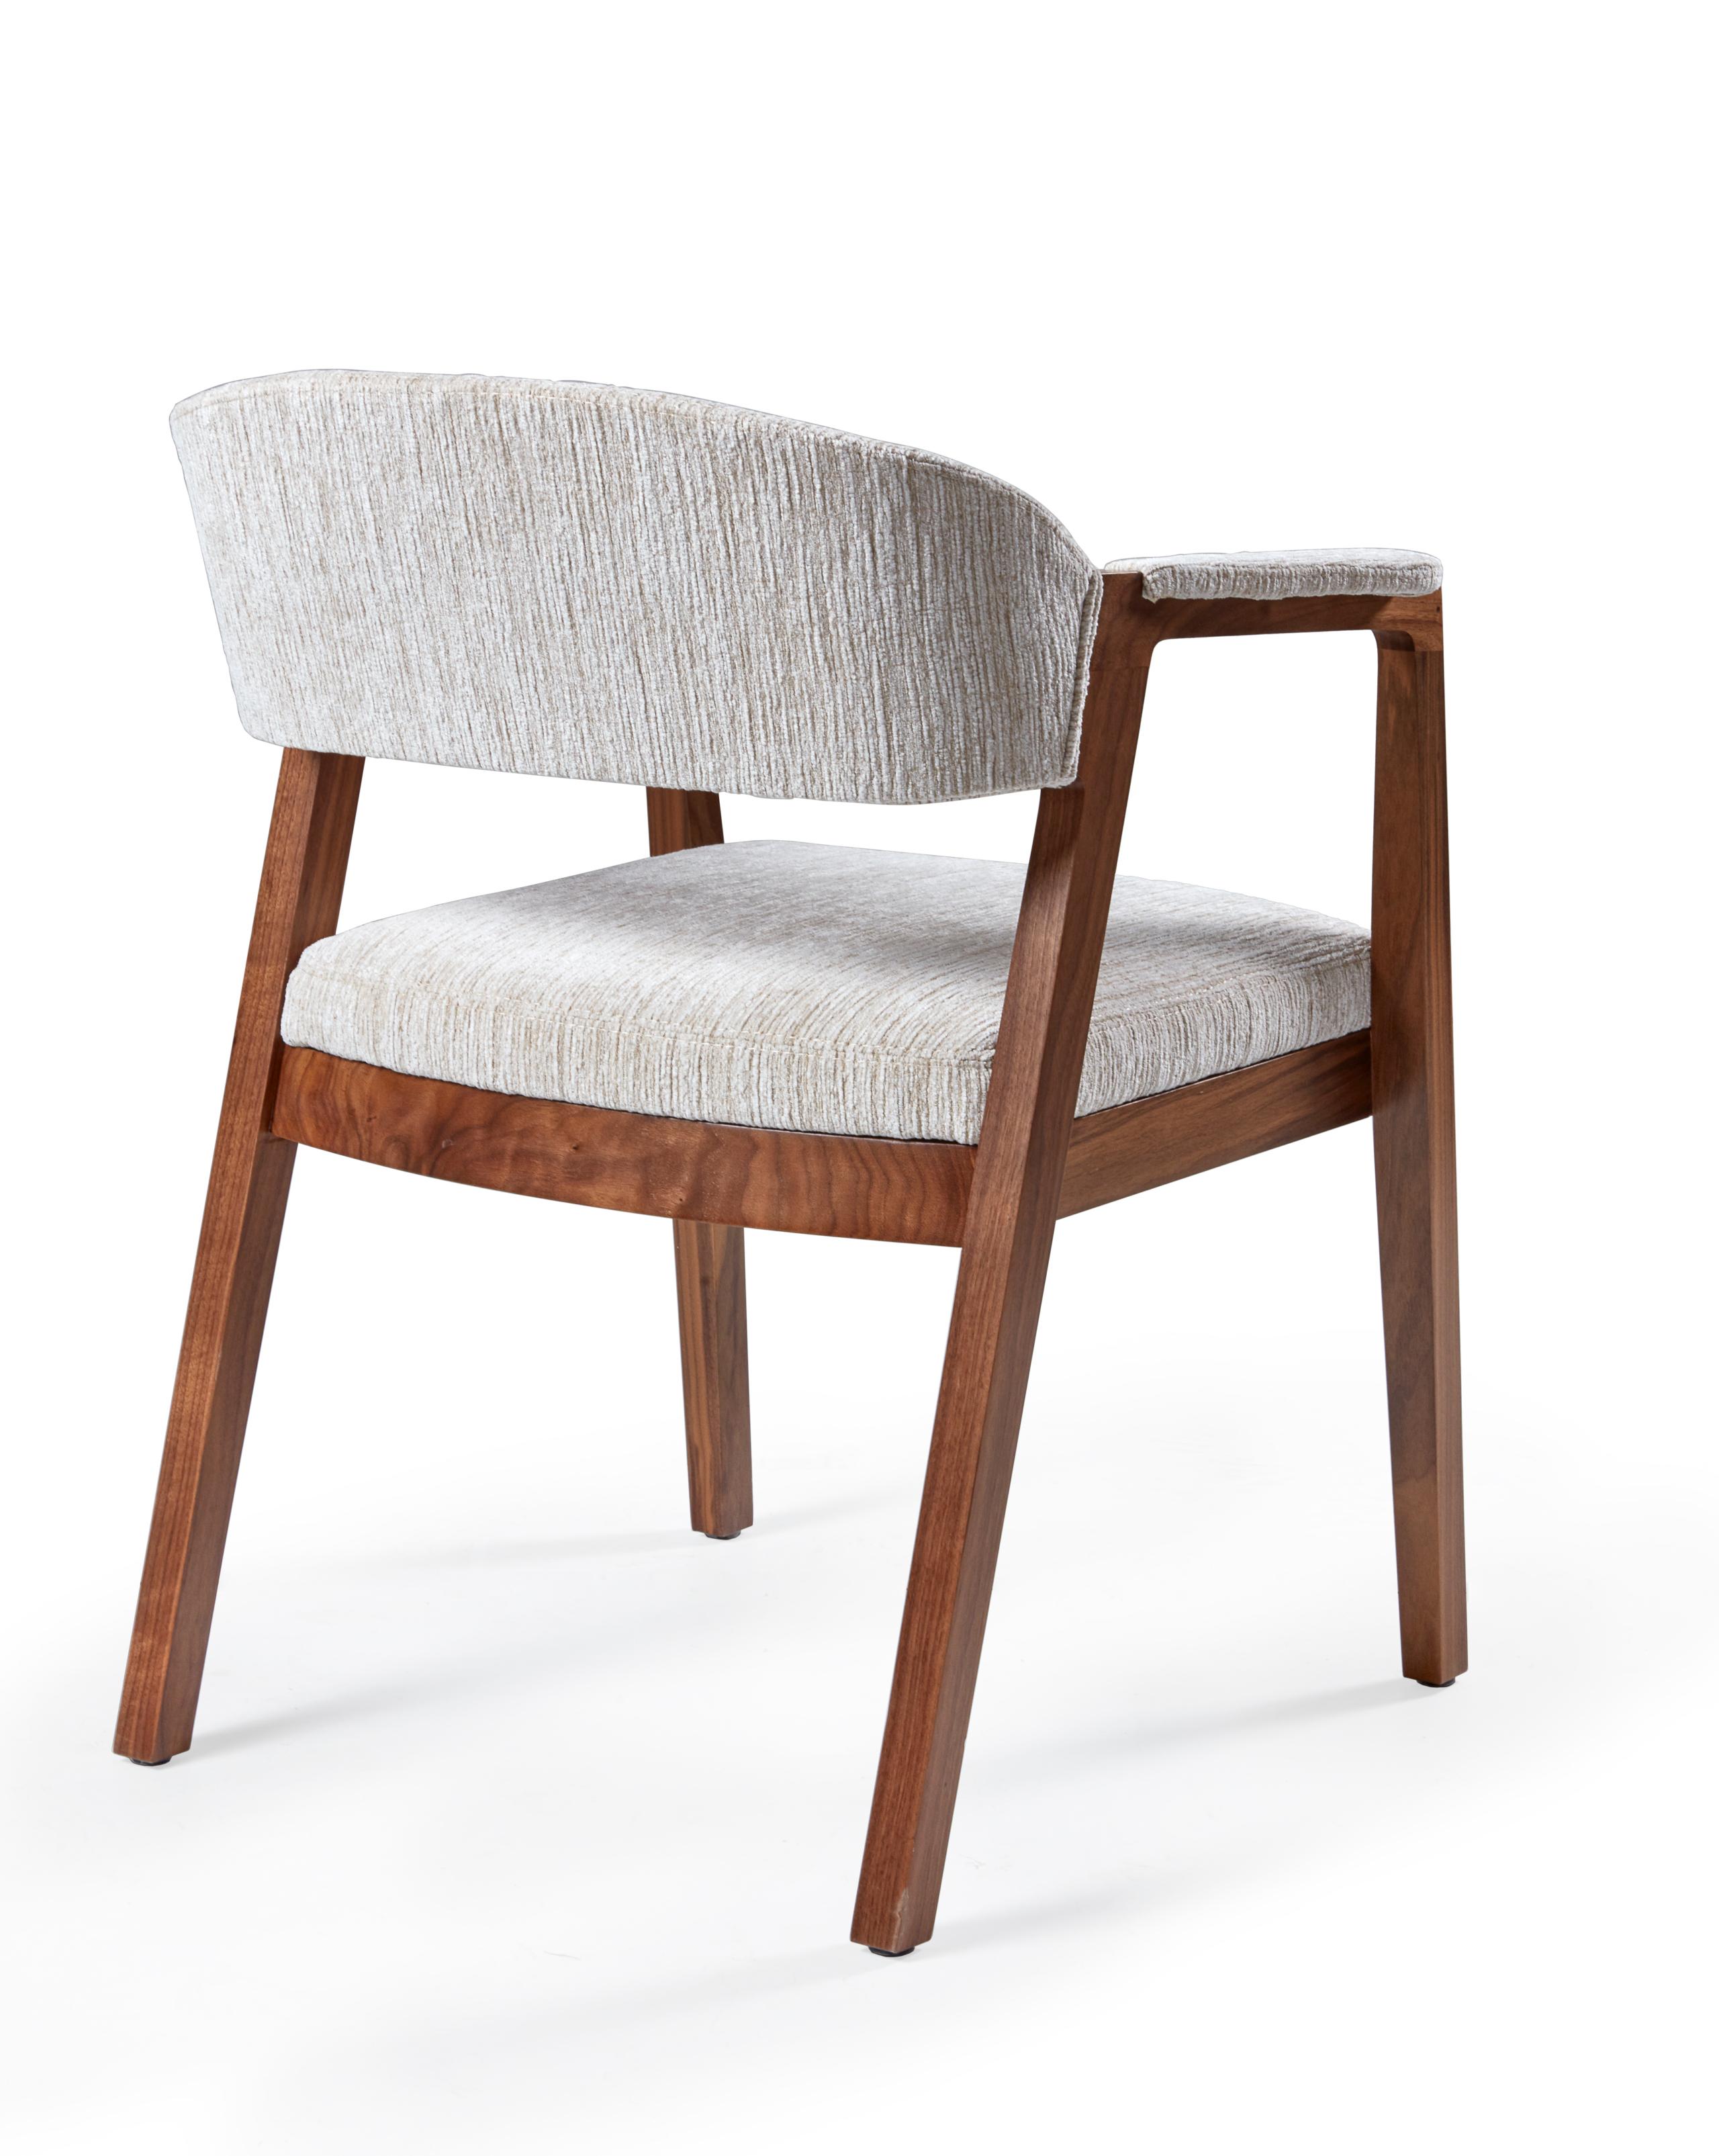 This sleek armed dining chair features an upholstered back and seat with the perfect pitch, assuring both your style and comfort are elevated.